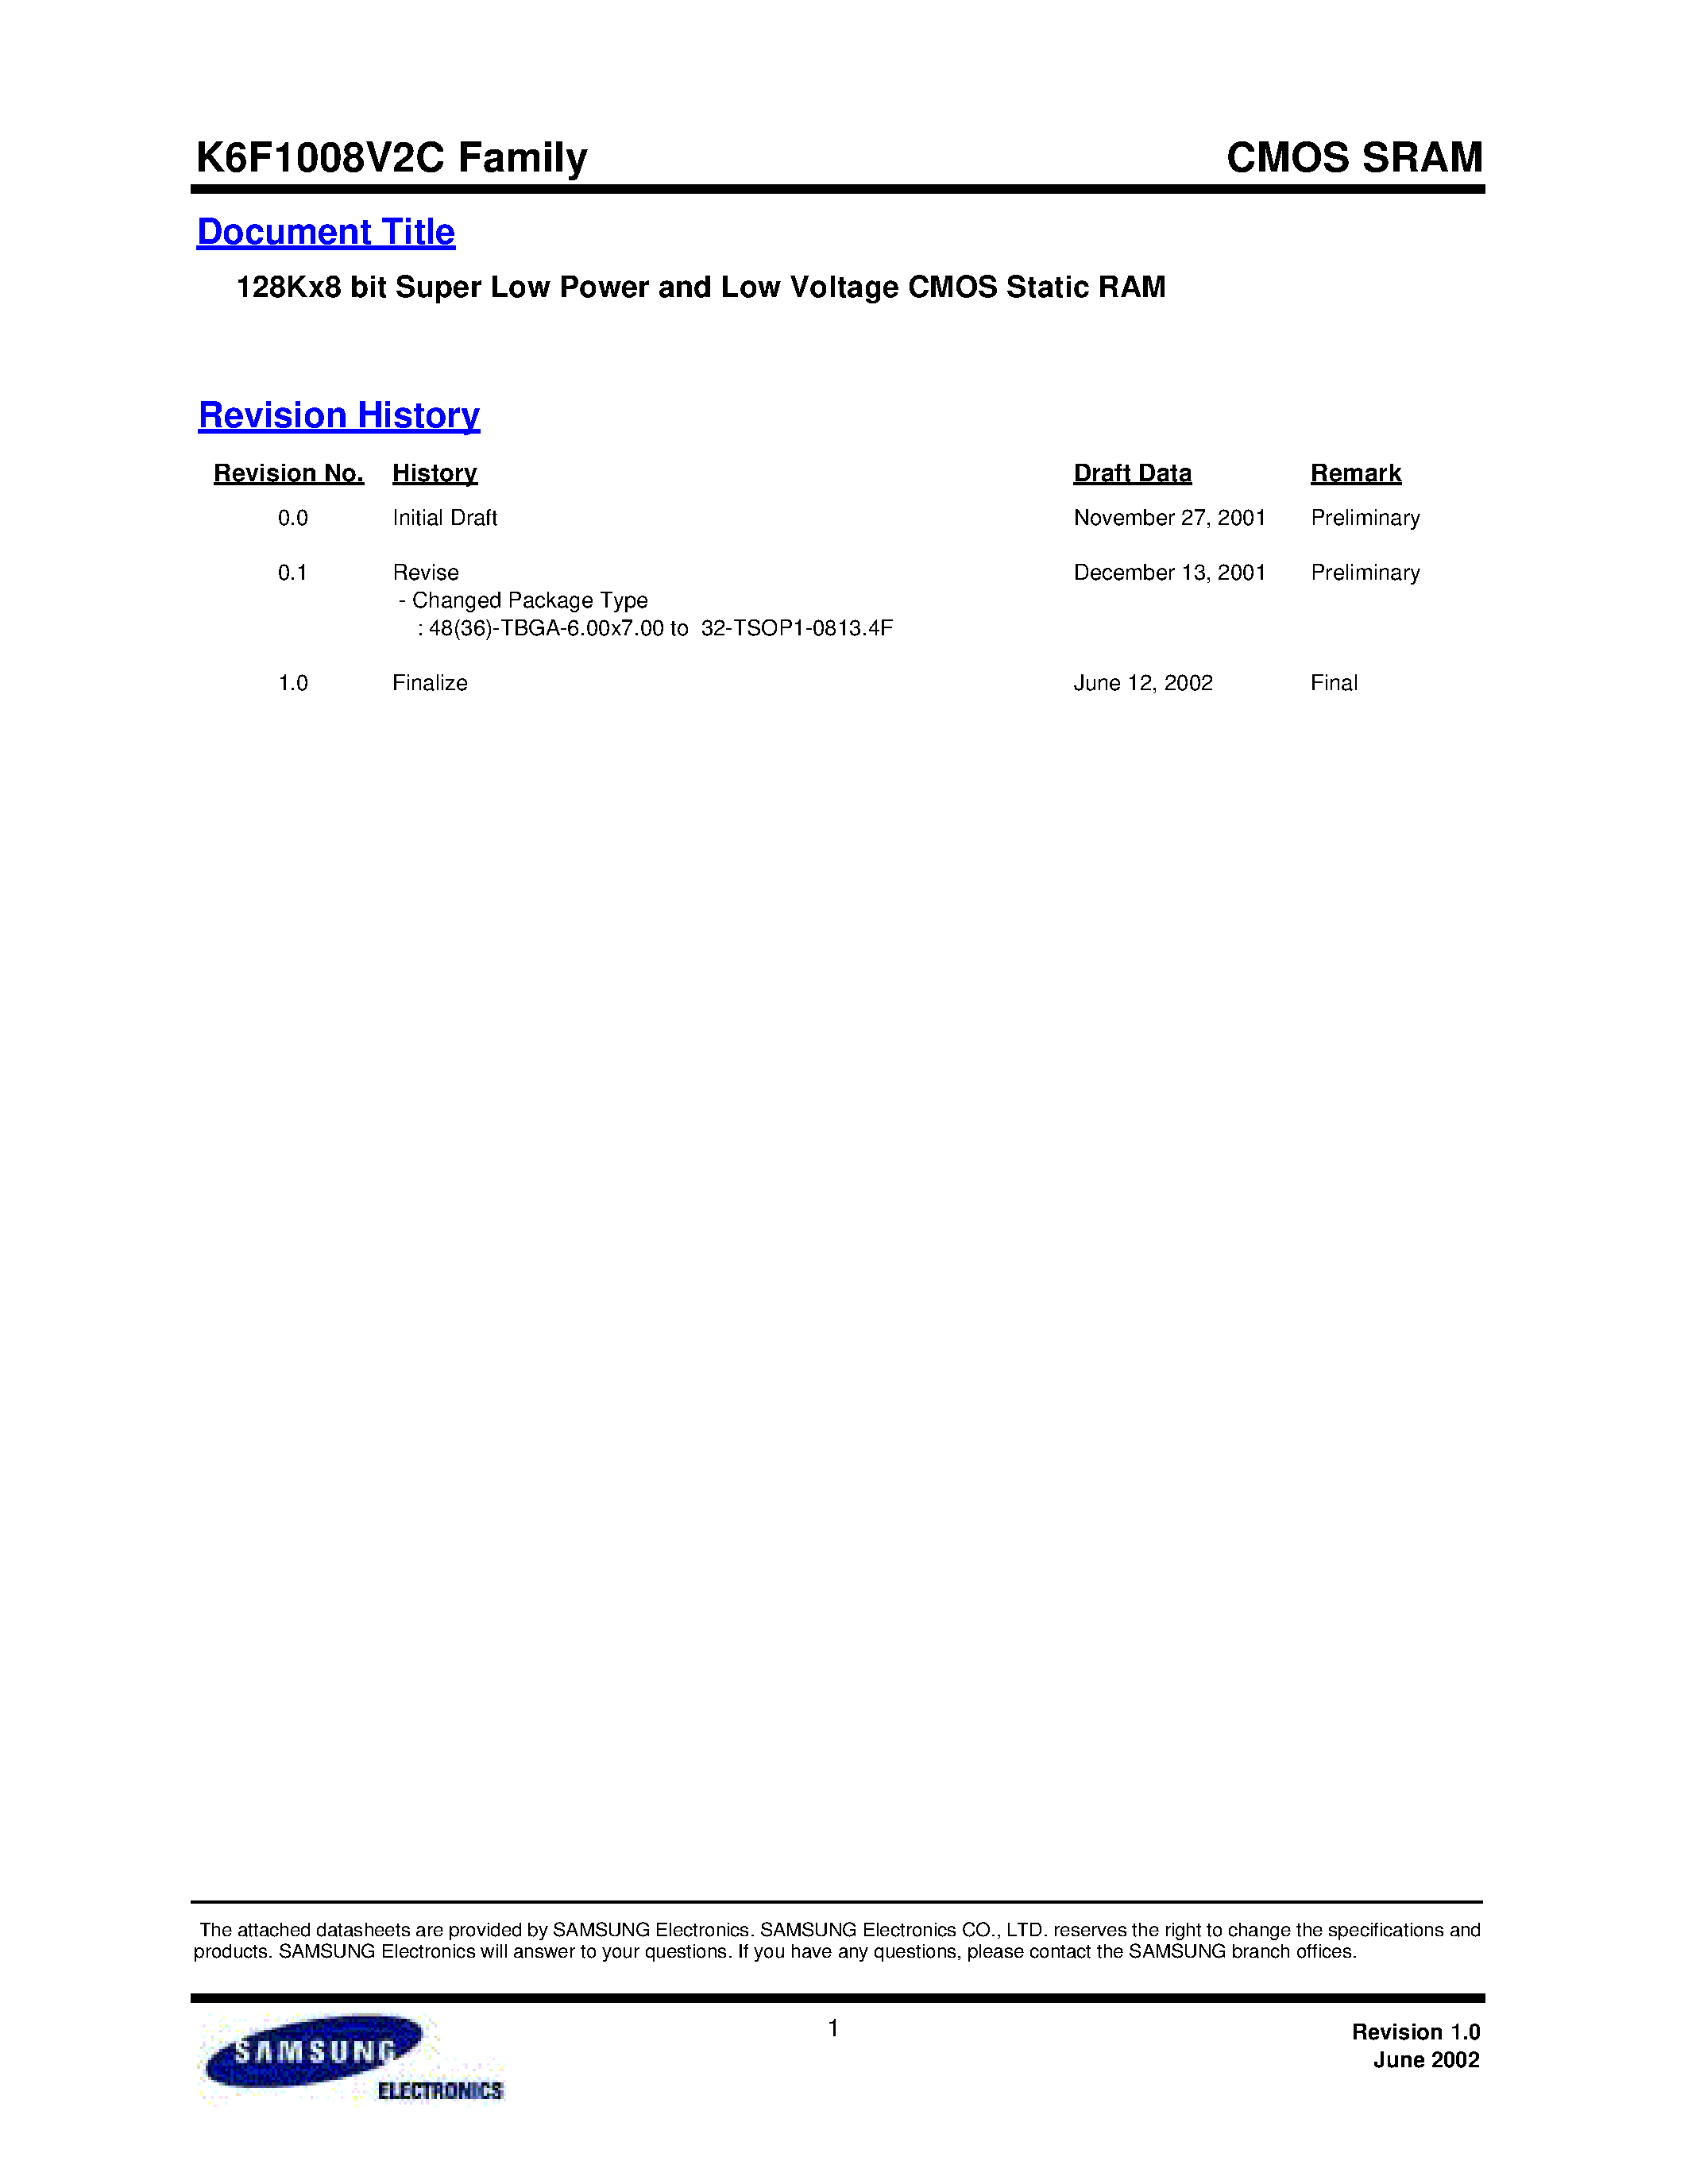 Datasheet K6F1008V2C-F - 128Kx8 bit Super Low Power and Low Voltage CMOS Static RAM page 1